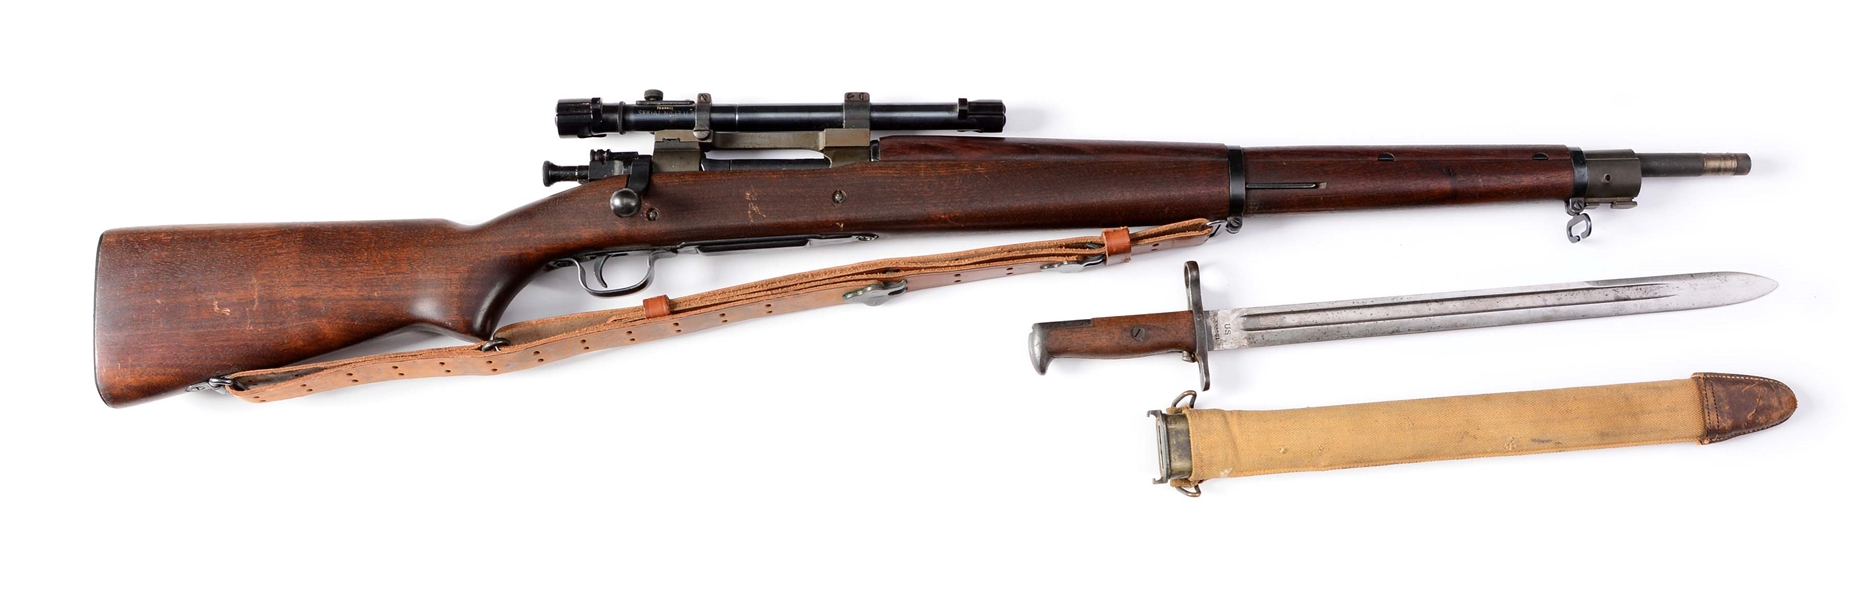 (C) U.S. REMINGTON 1903-A3 SNIPER RIFLE WITH SLING & SCOPE.